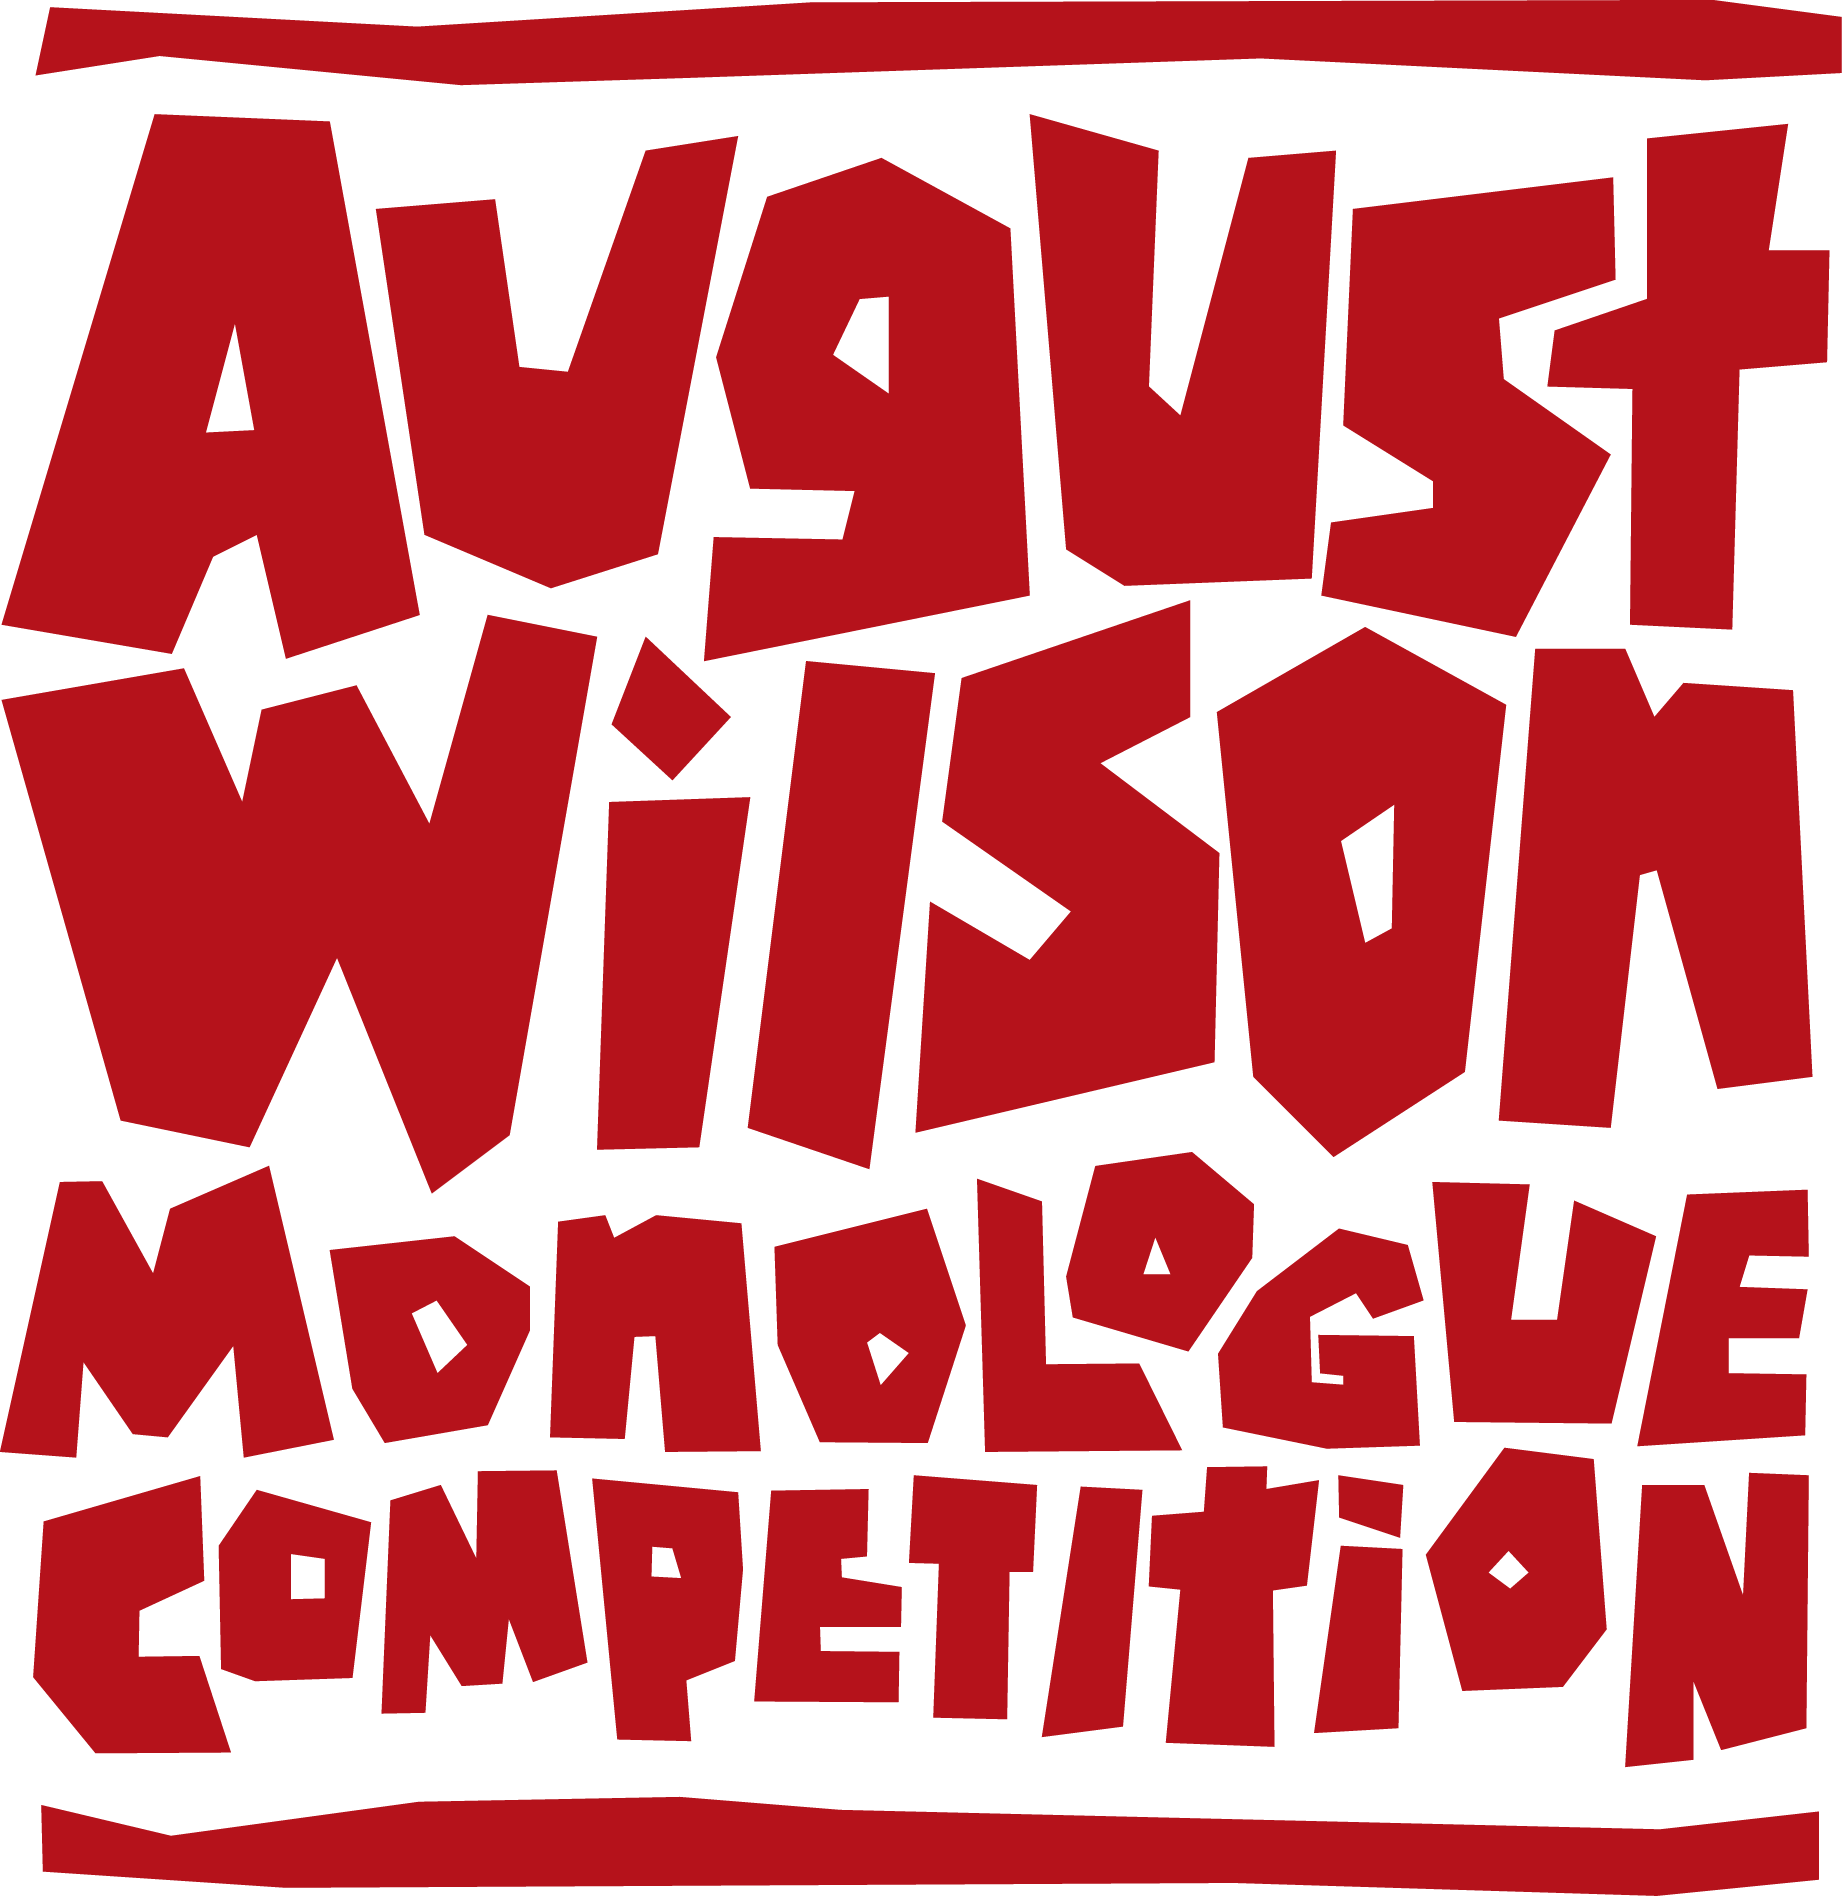 2016 August Wilson Monologue Competition Chicago Finals to be held Monday, March 7 at Goodman Theatre 4